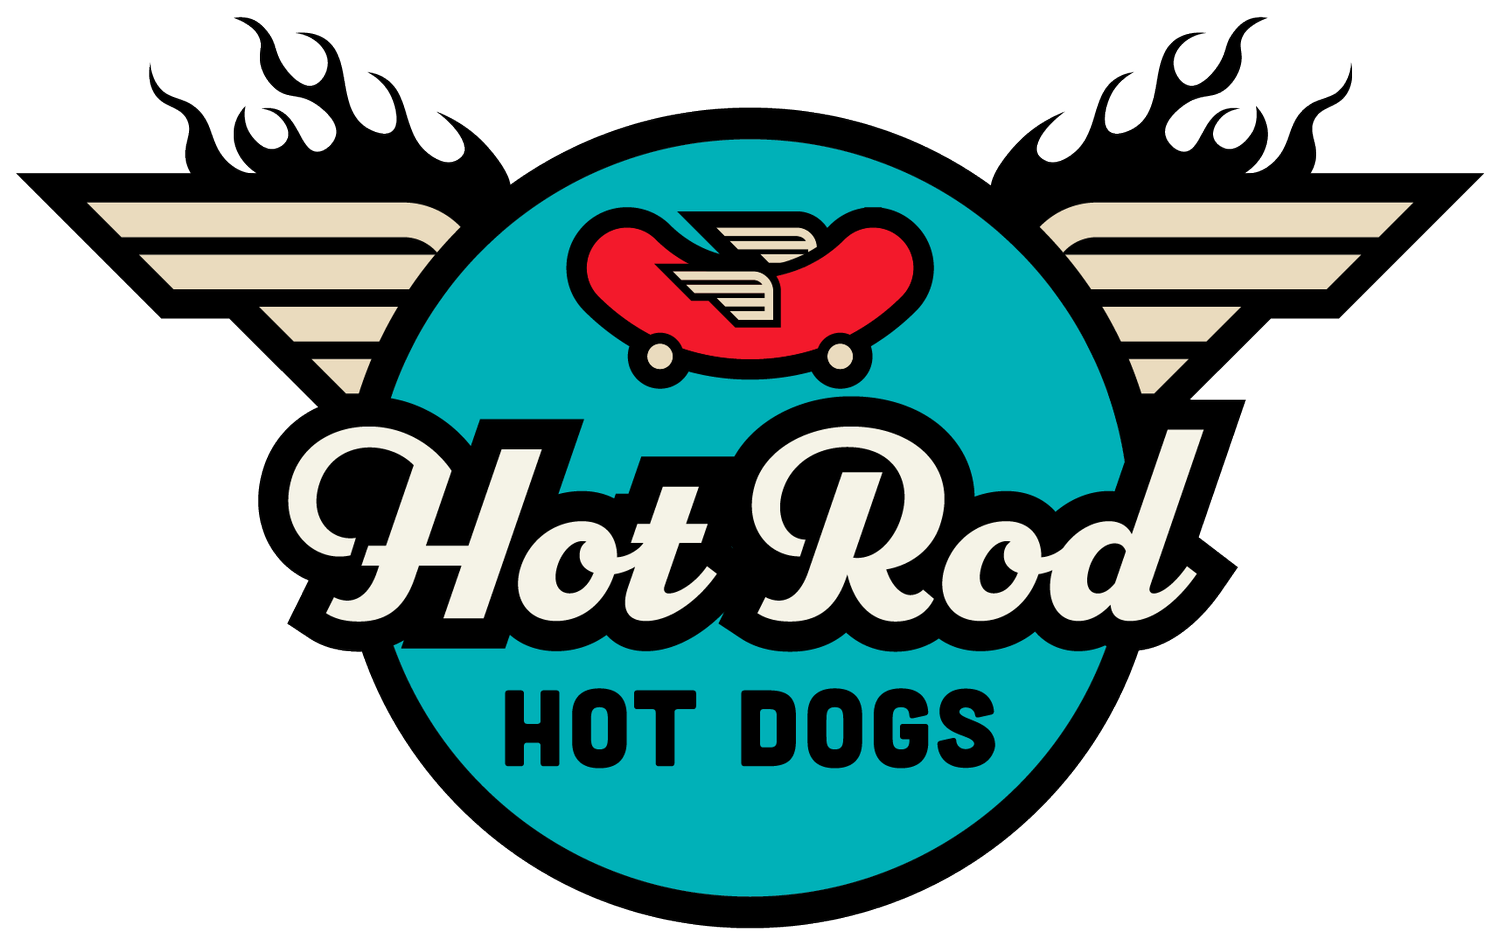 Hot Rod Hot Dogs